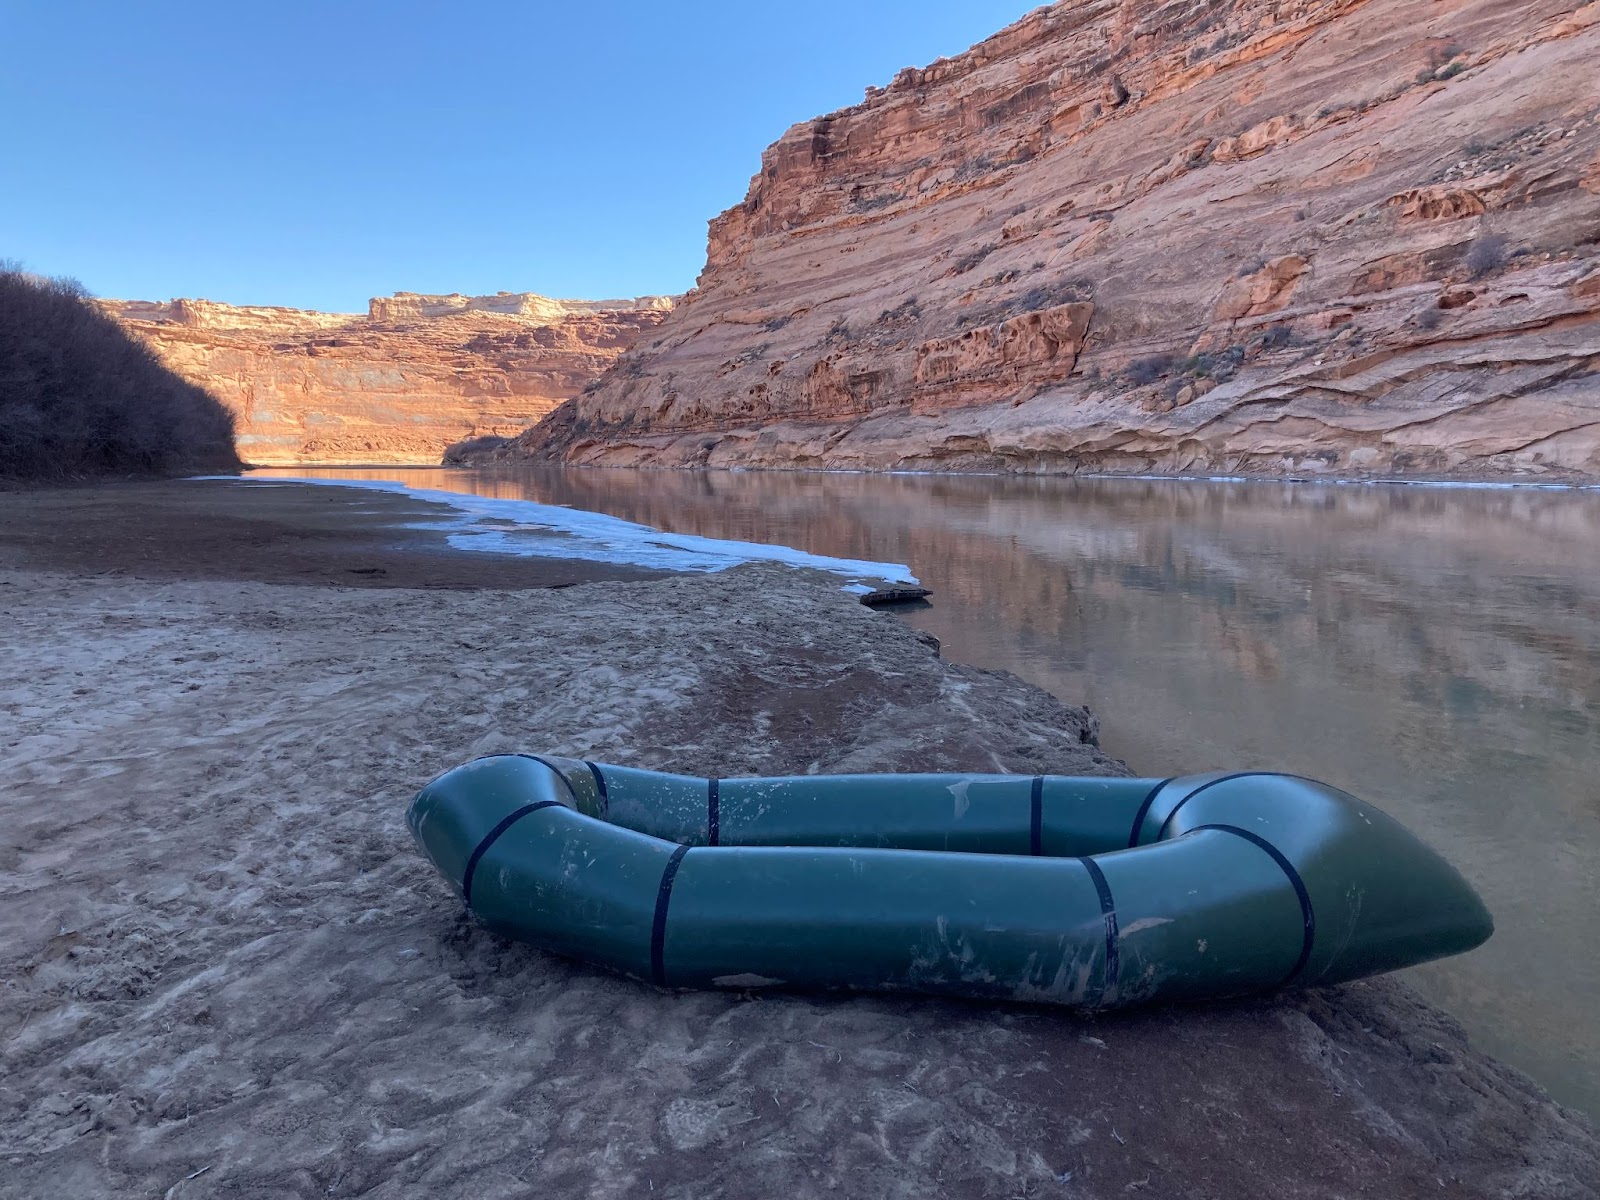 An Alpacka Scout on the shores of a river in a canyon.